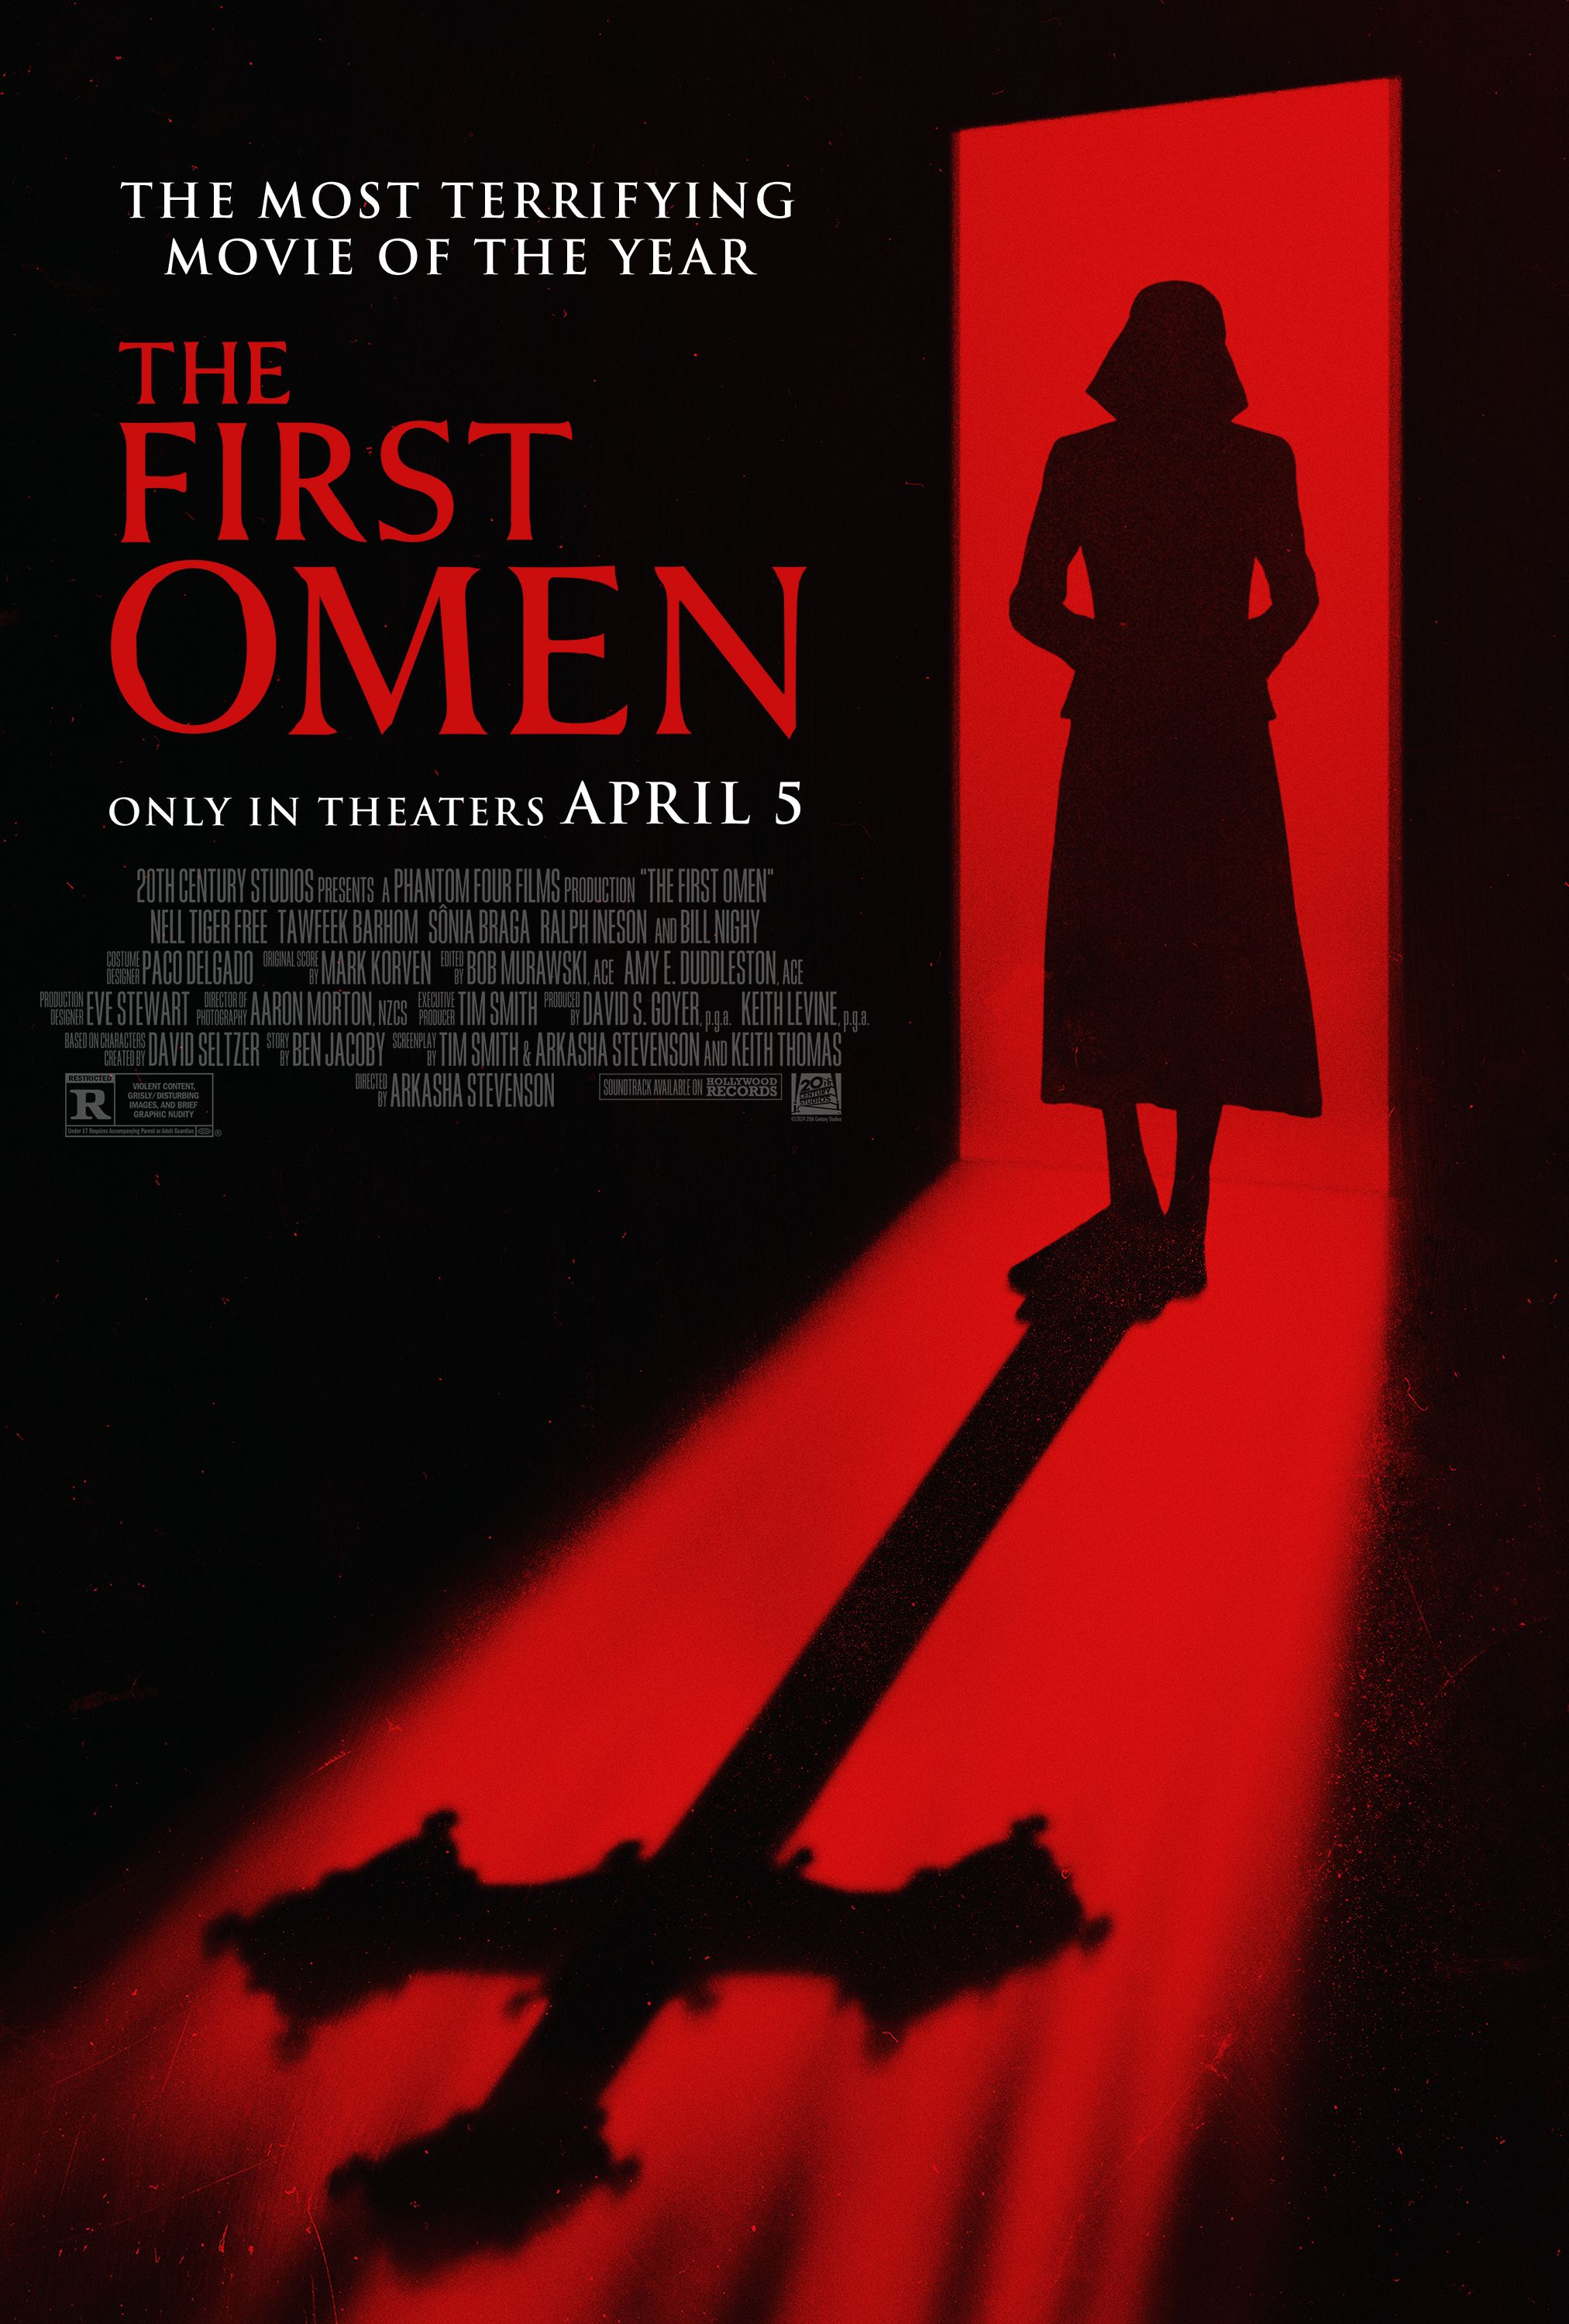 ‘The First Omen’ Global Box Office Passes Its Reported Budget